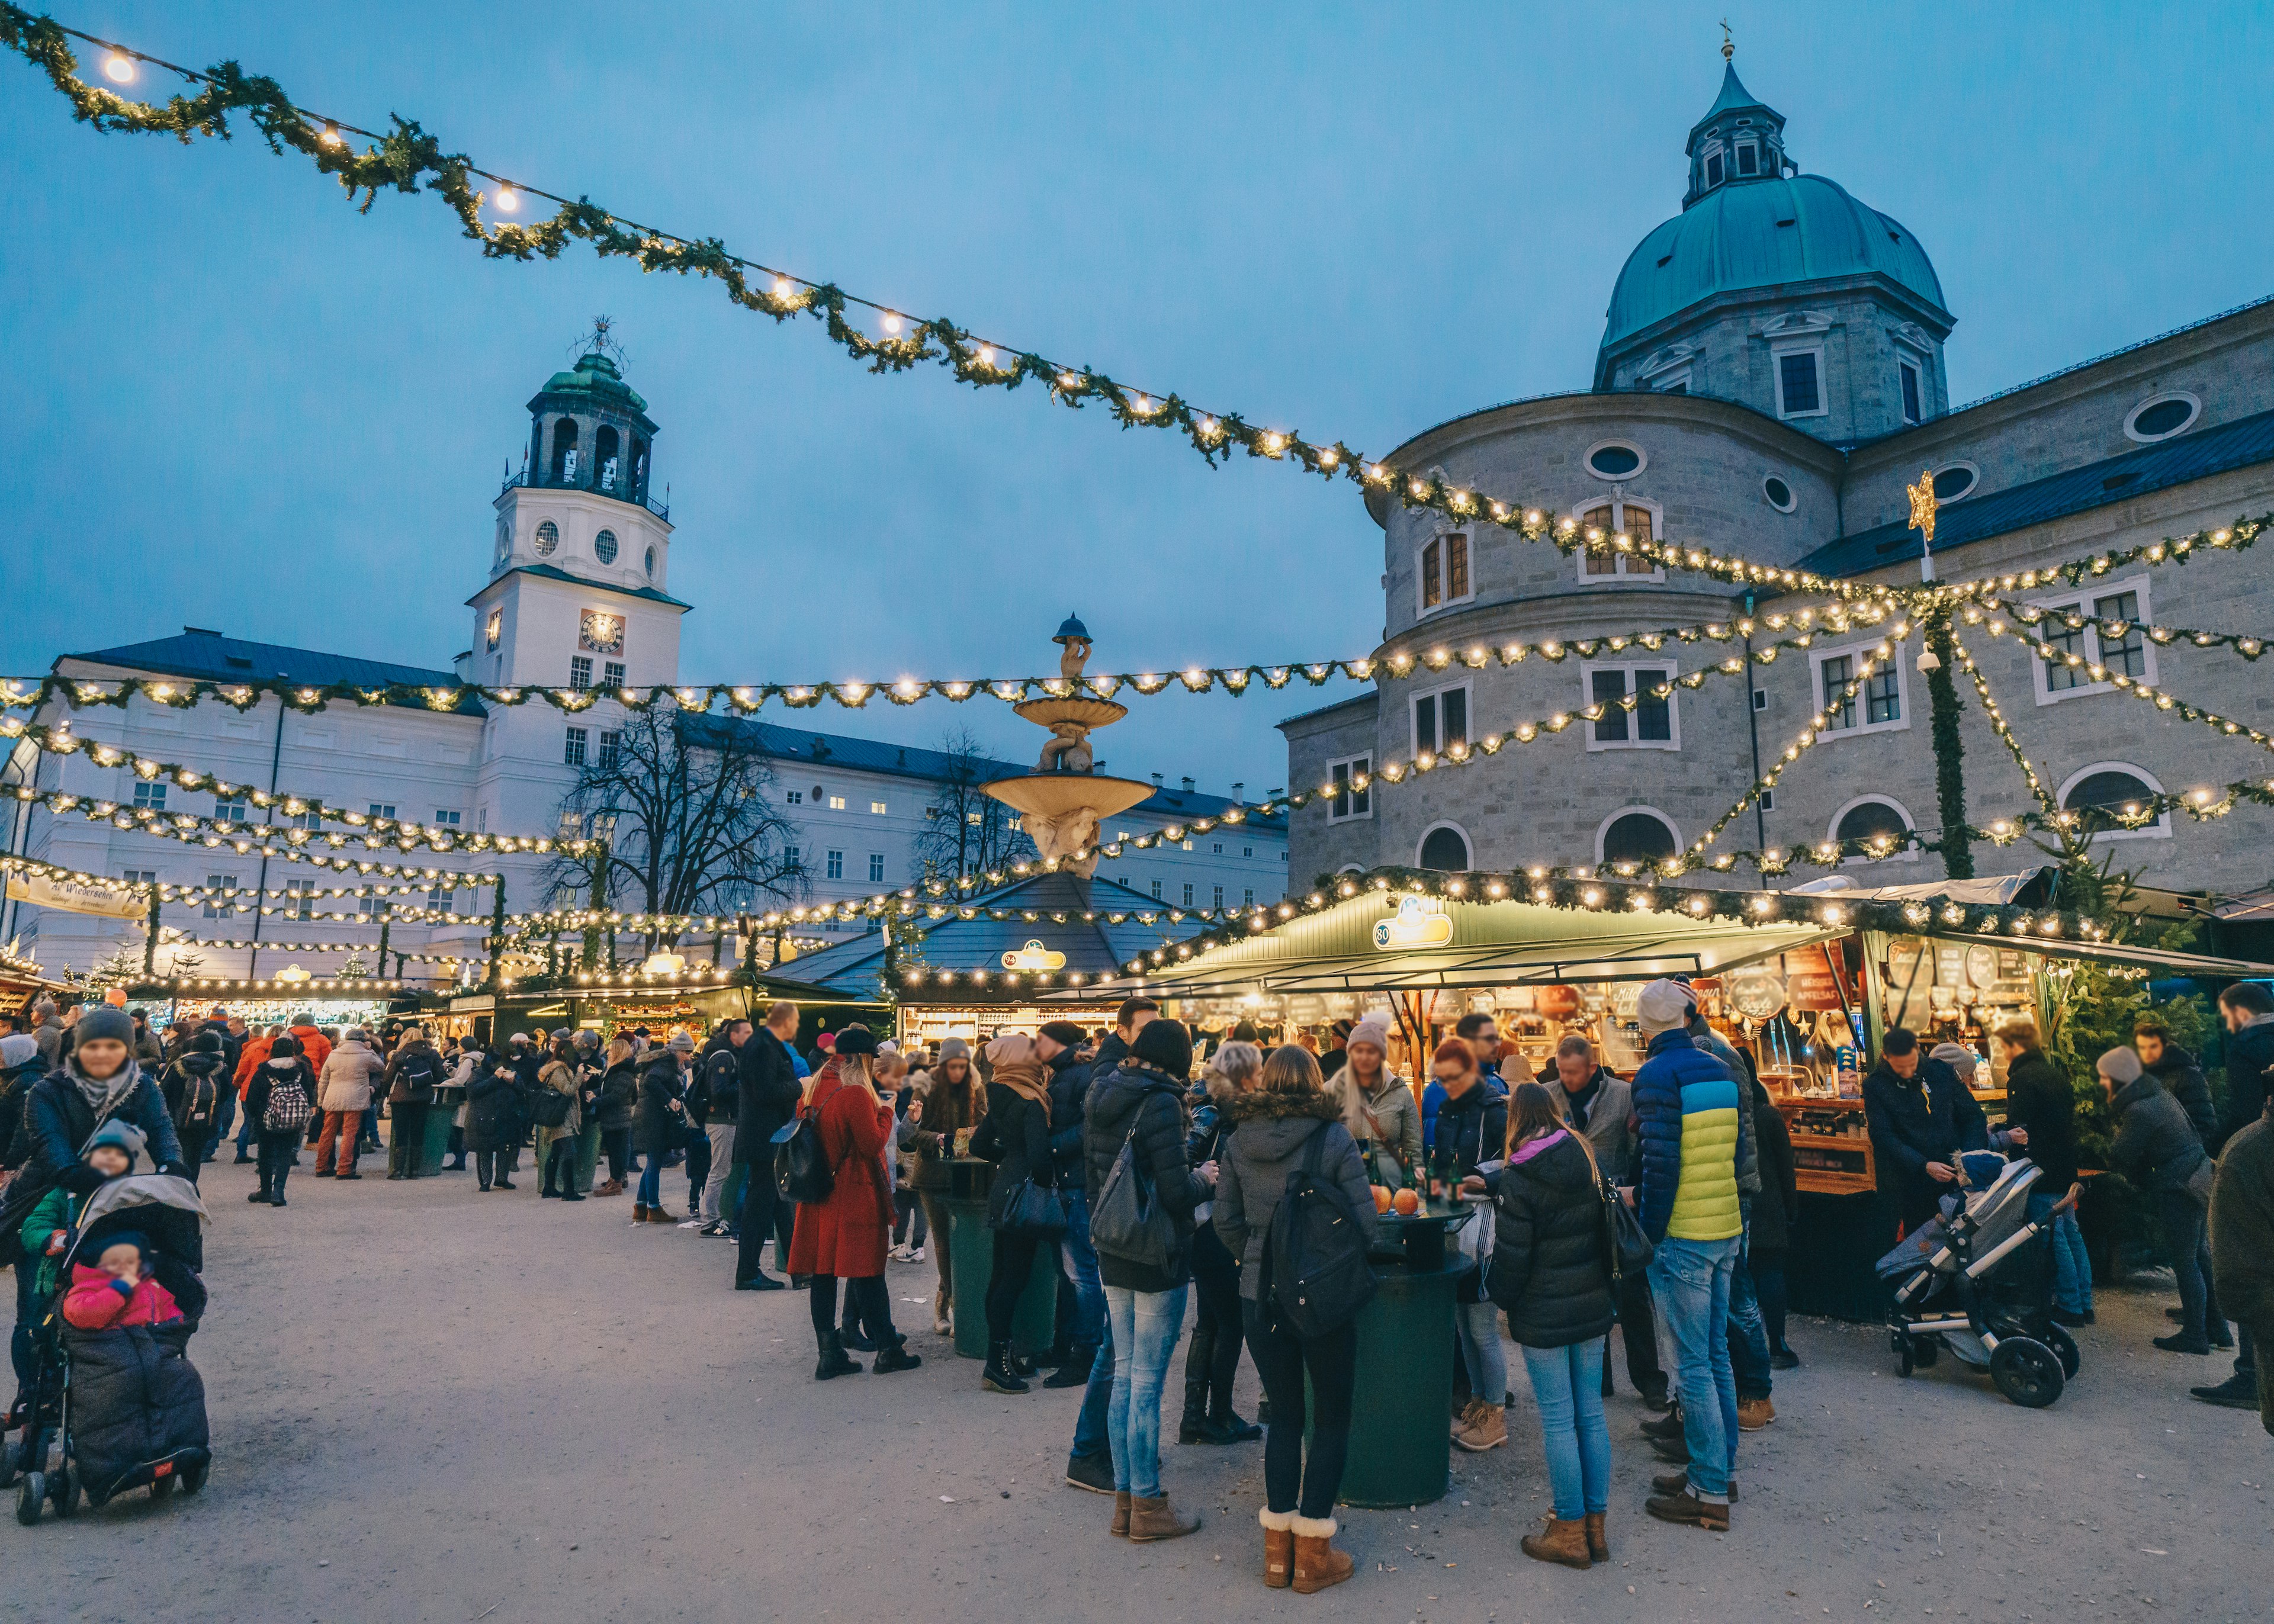 Warmly dressed people sipping mulled wine at a Salszburg Christmas Market